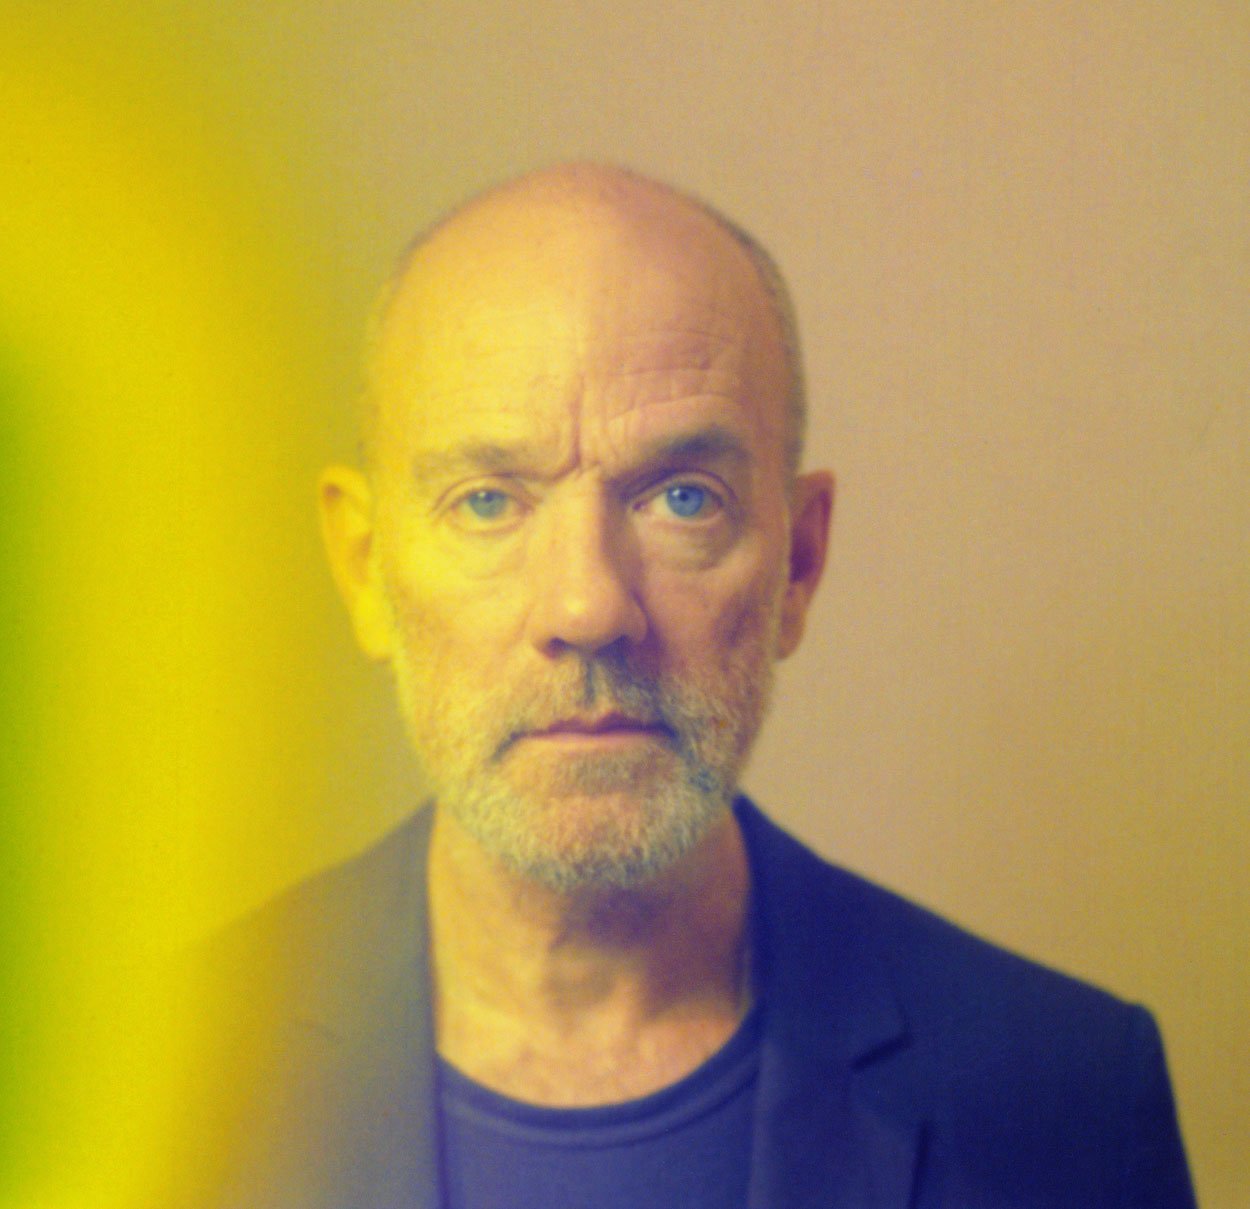 MICHAEL STIPE'S first solo release 'Your Capricious Soul' will be available on streaming platforms on Friday, November 1st 